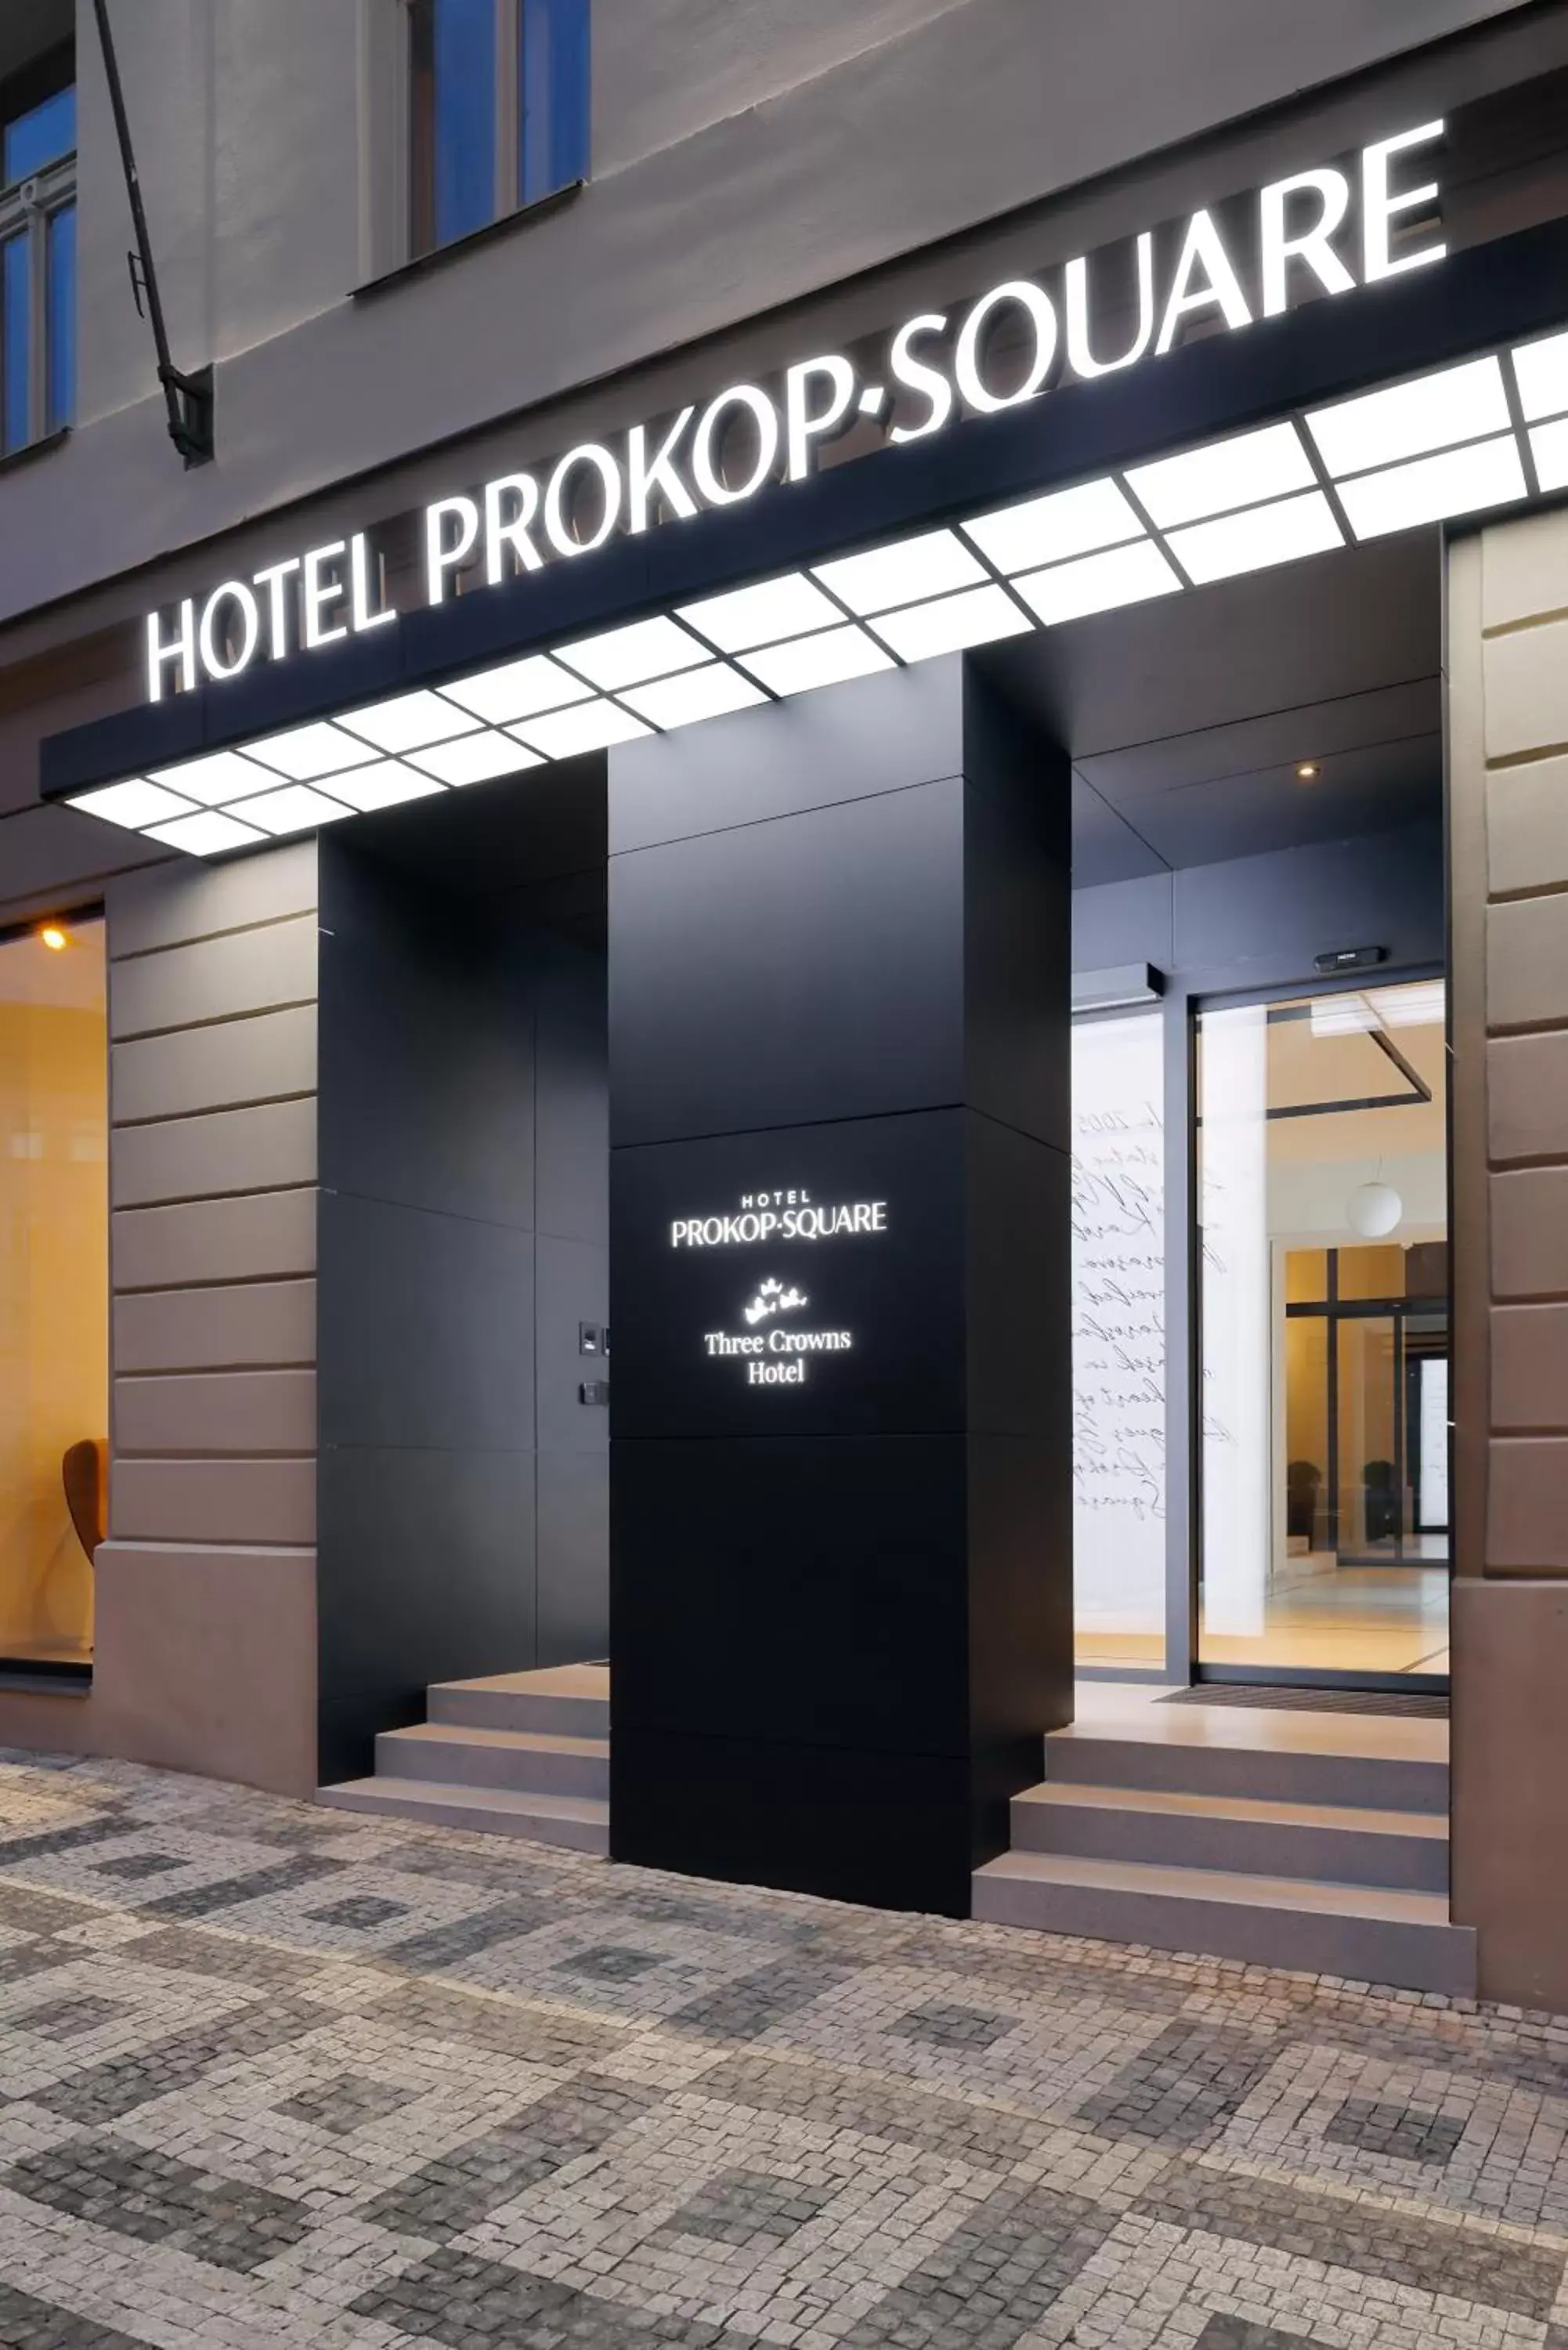 Property building, Property Logo/Sign in Hotel Prokop Square